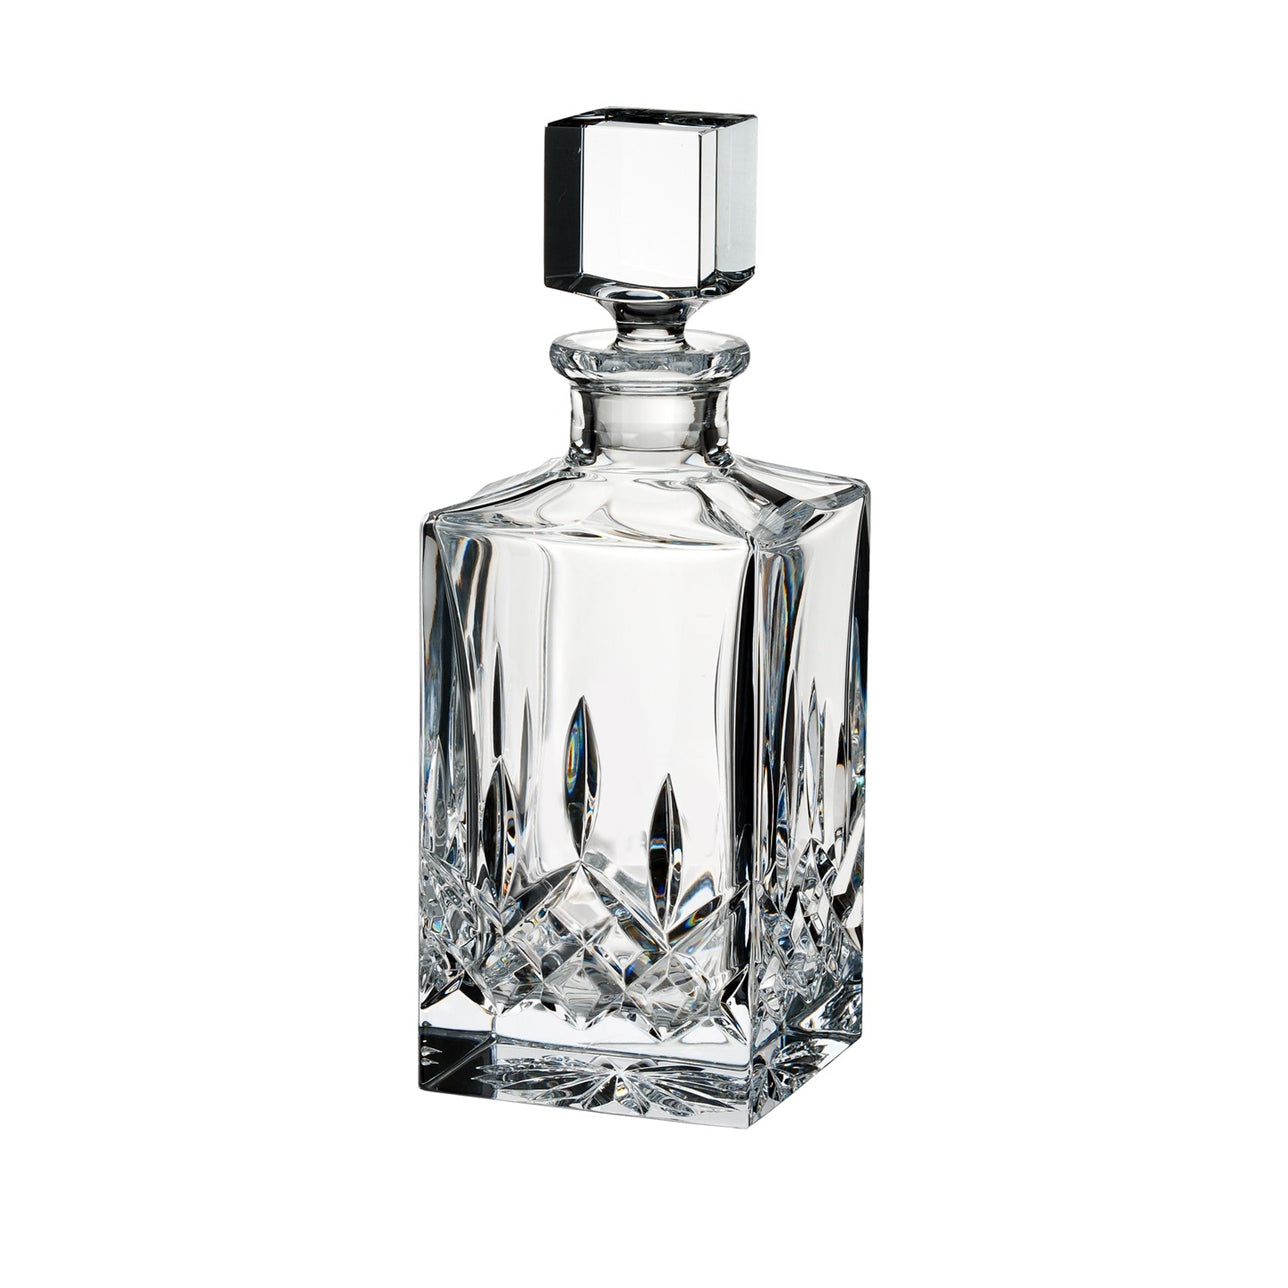 Waterford Crystal Lismore Square Decanter   Proudly pour your favourite single malt from this charming Lismore 26oz Square Decanter and become a connoisseur. With its striking square profile, this traditional crystal whiskey decanter will look magnificent as it highlights the rich colour of its contents, radiating luxury and excellence as you entertain guests or savour something that is too good to share